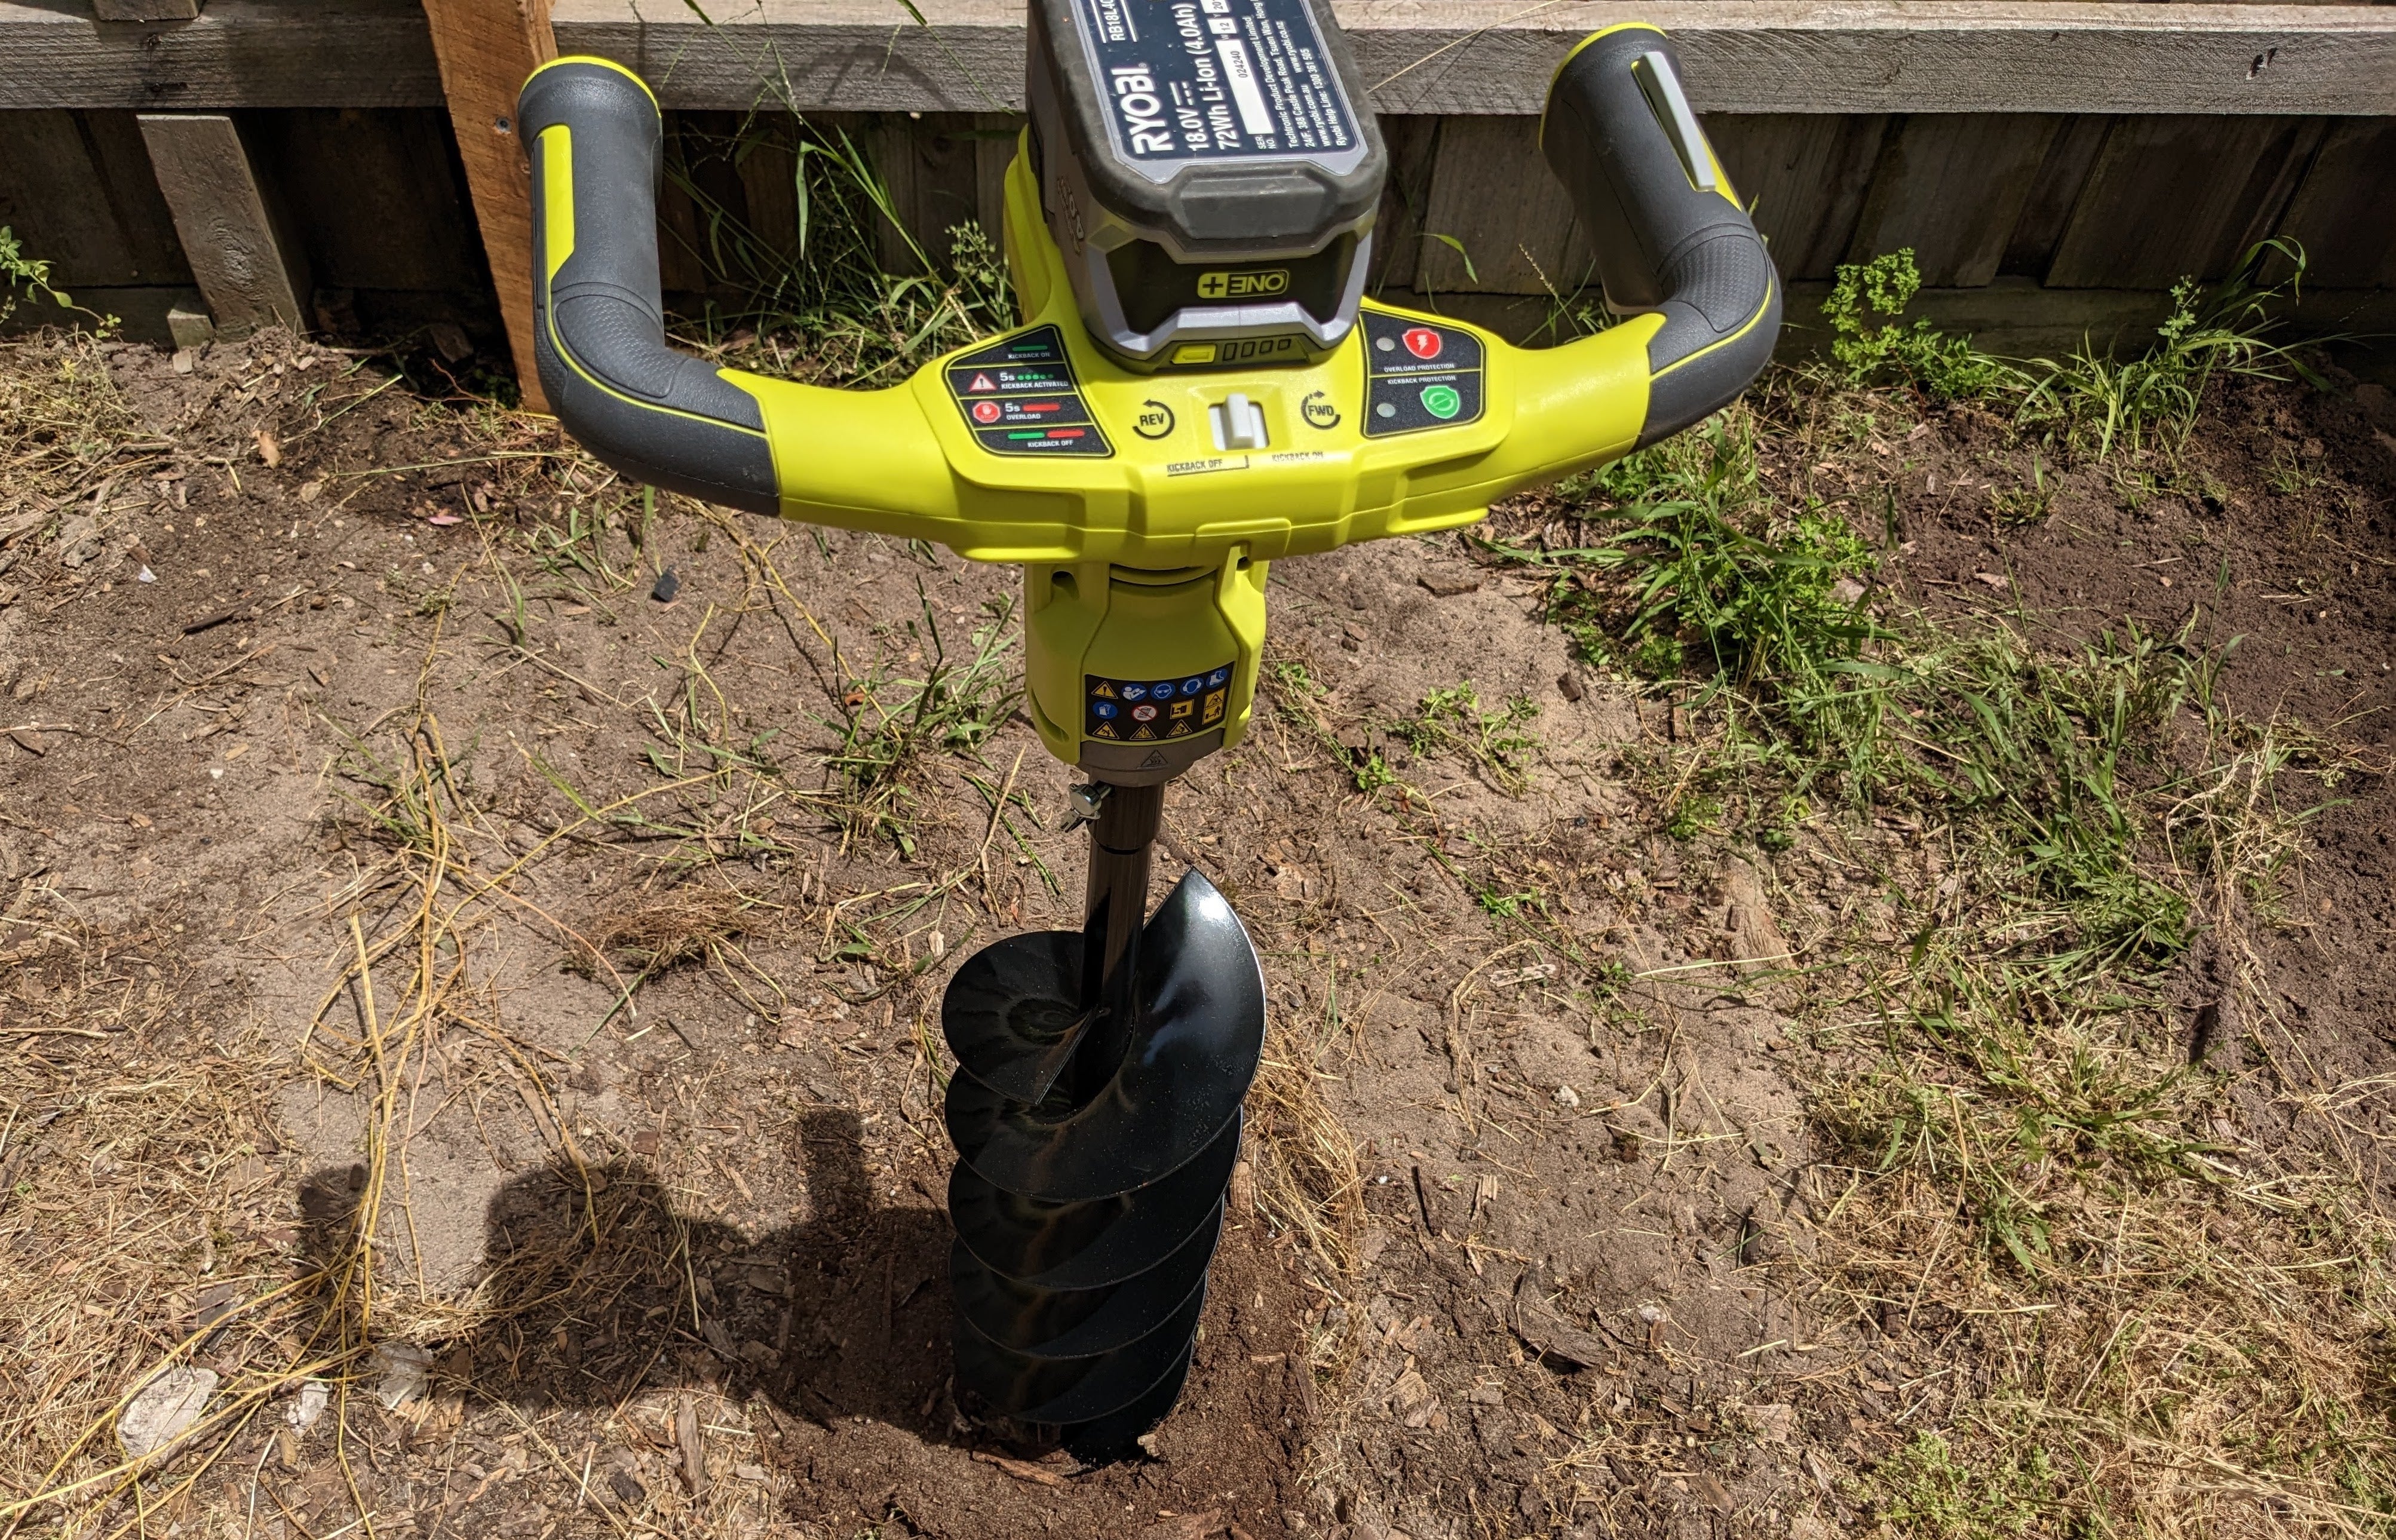 Picture of the Ryobi hole digger in an outdoor area